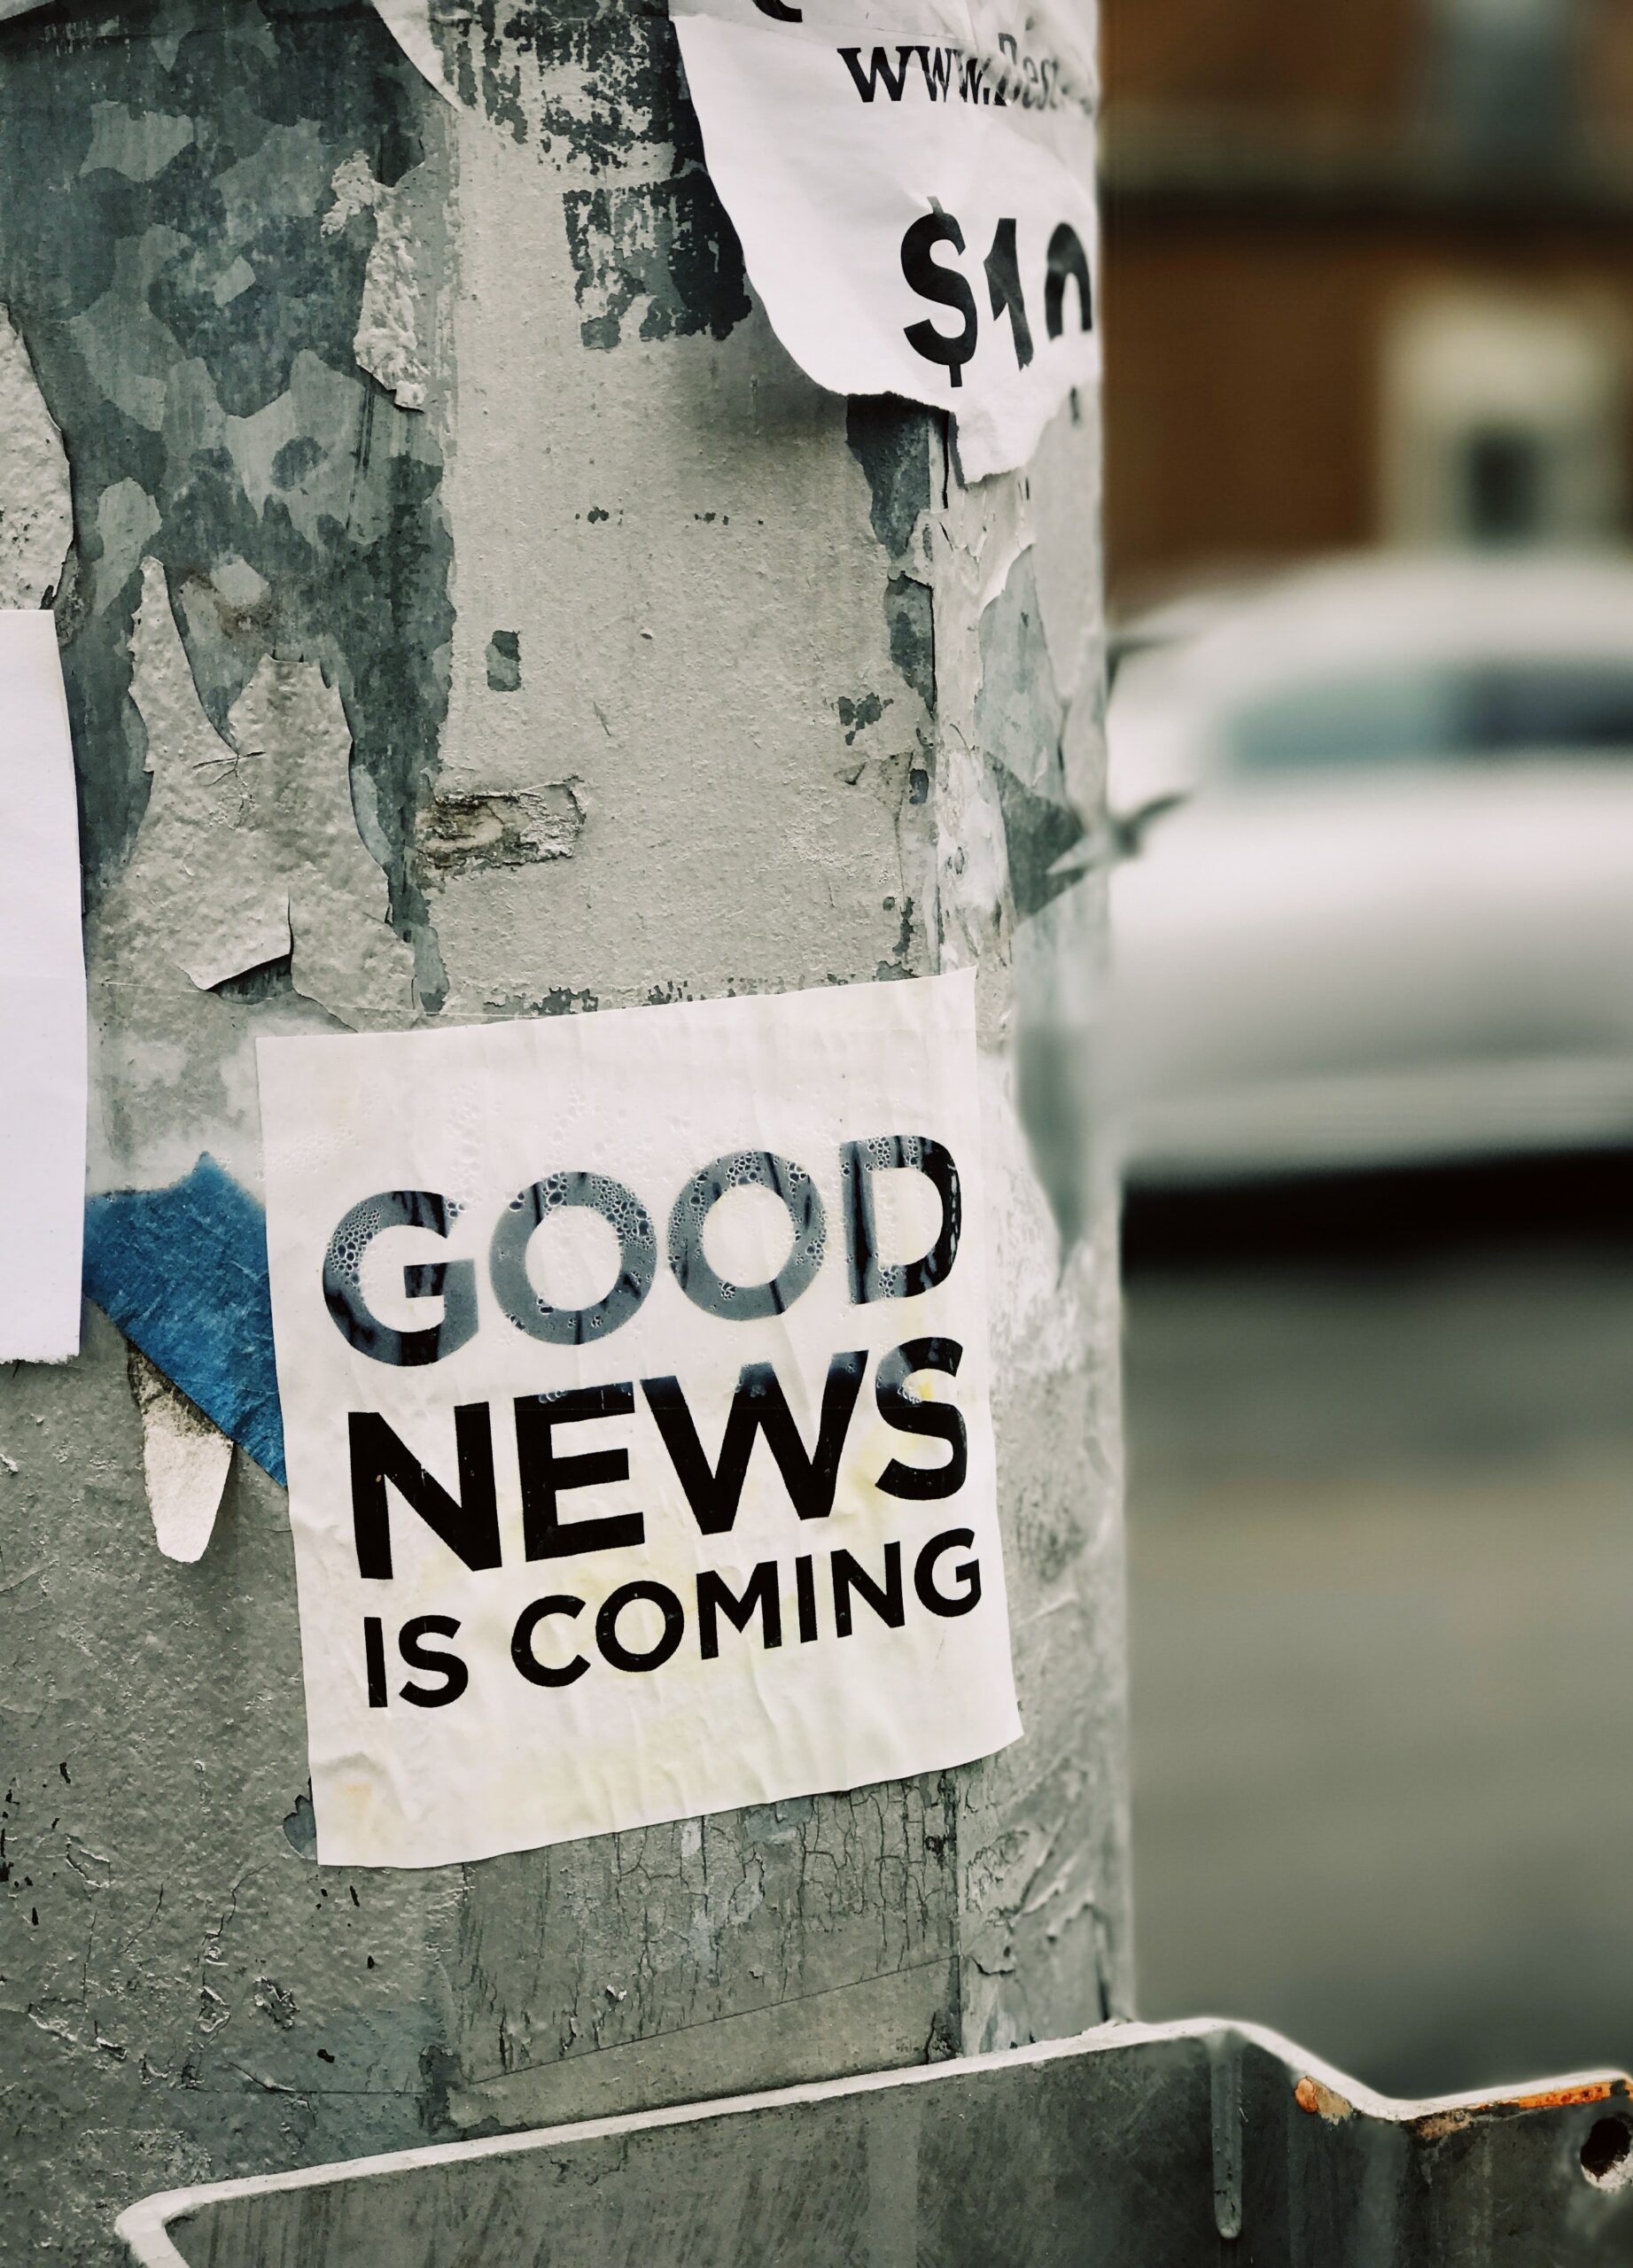 A pole has a poster on it that reads "Good news is coming."